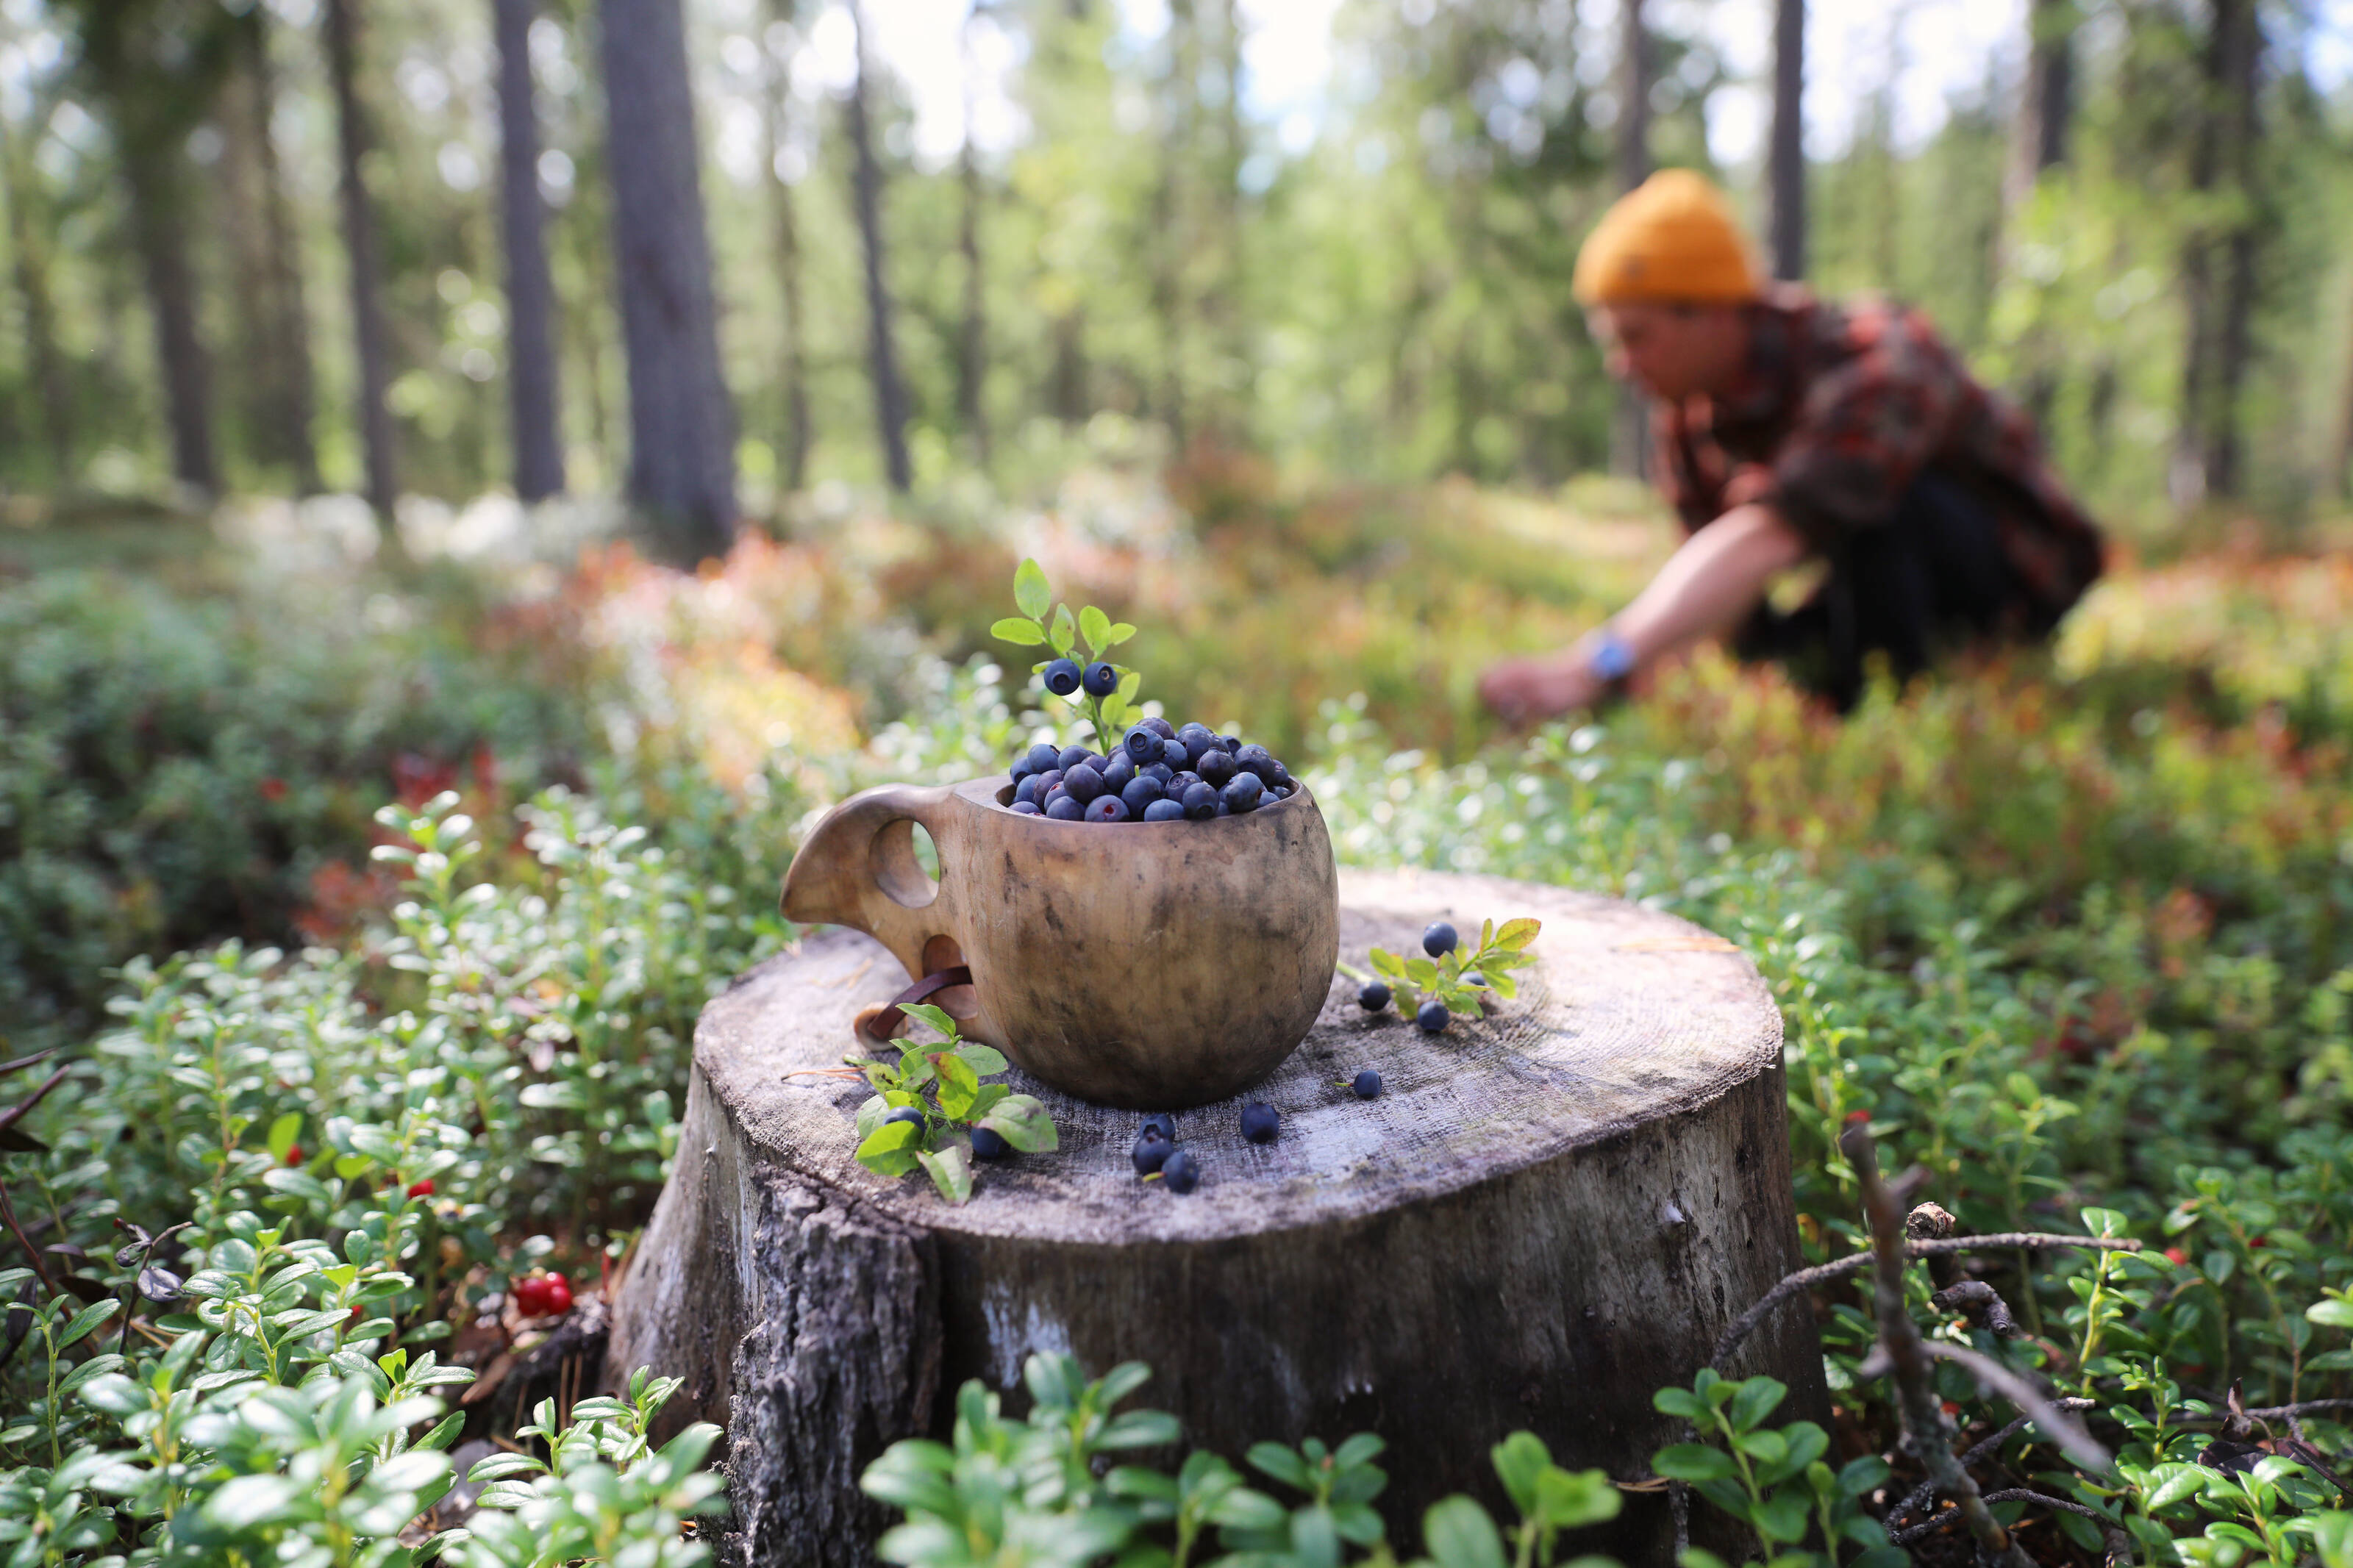 A pot of bilberries sits on the stump of a tree while a man picks in the background.